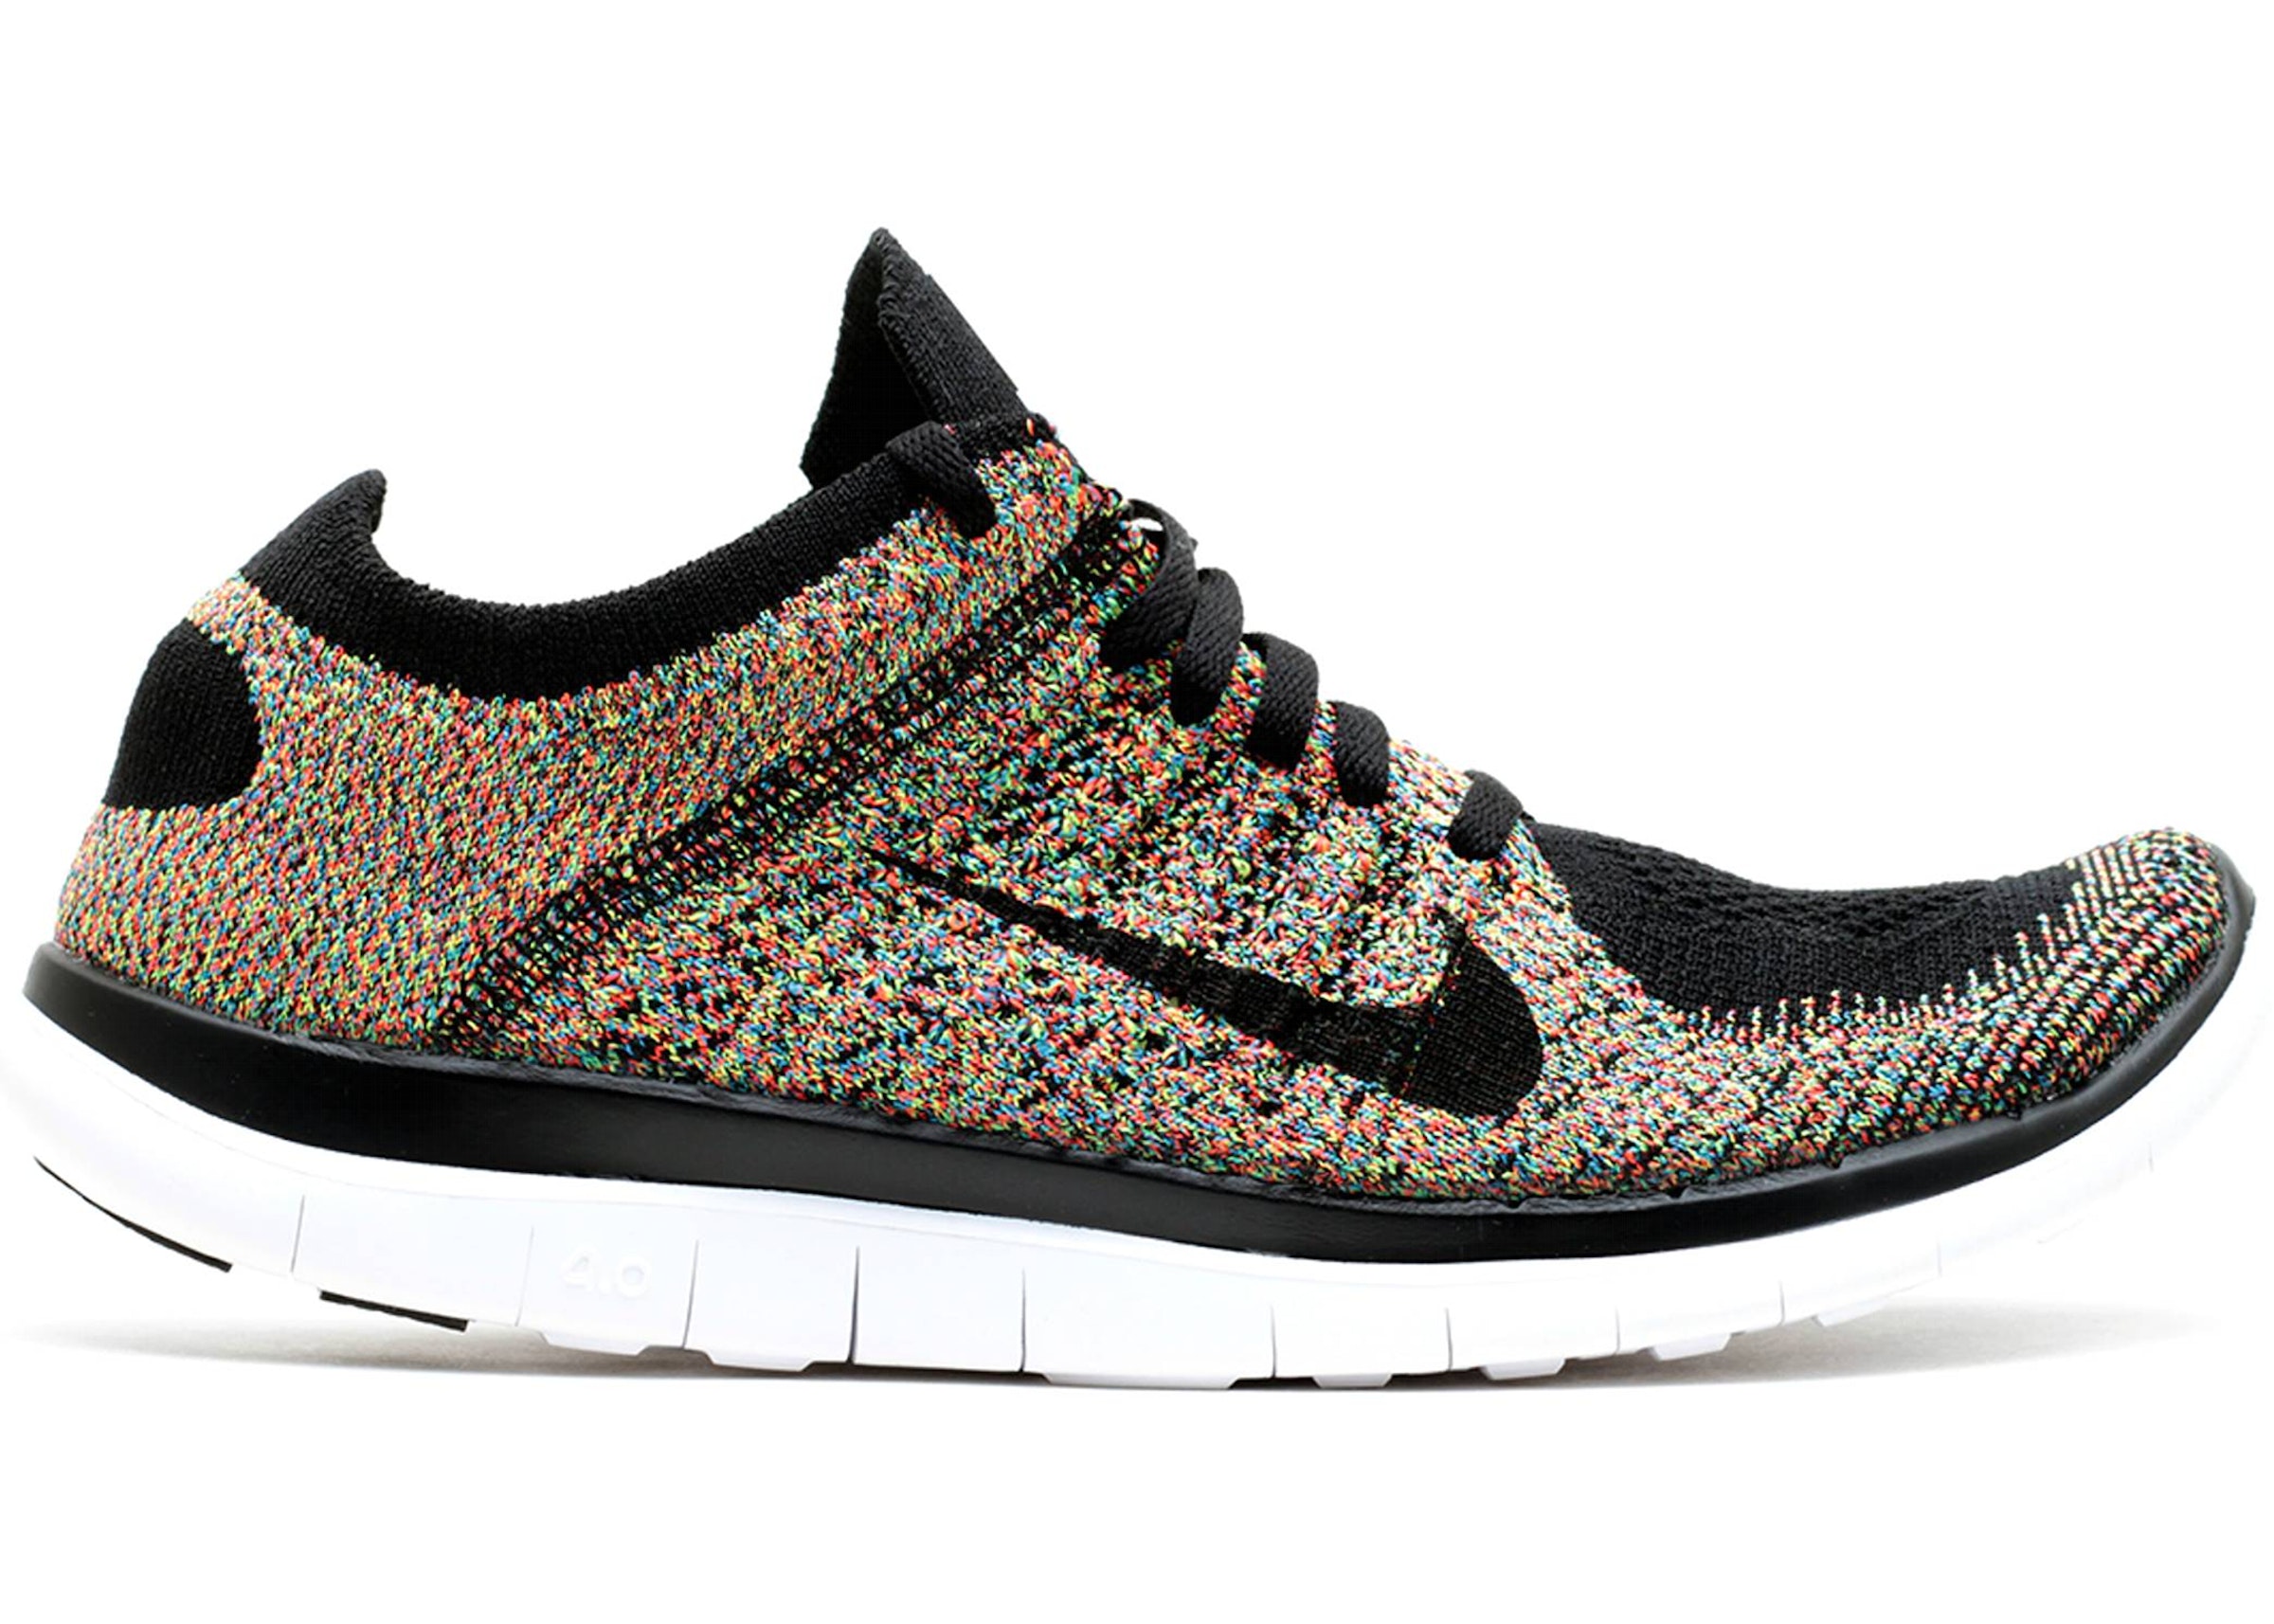 Nike Free Flyknit Multi-Color Hombre - 631053-004 - US